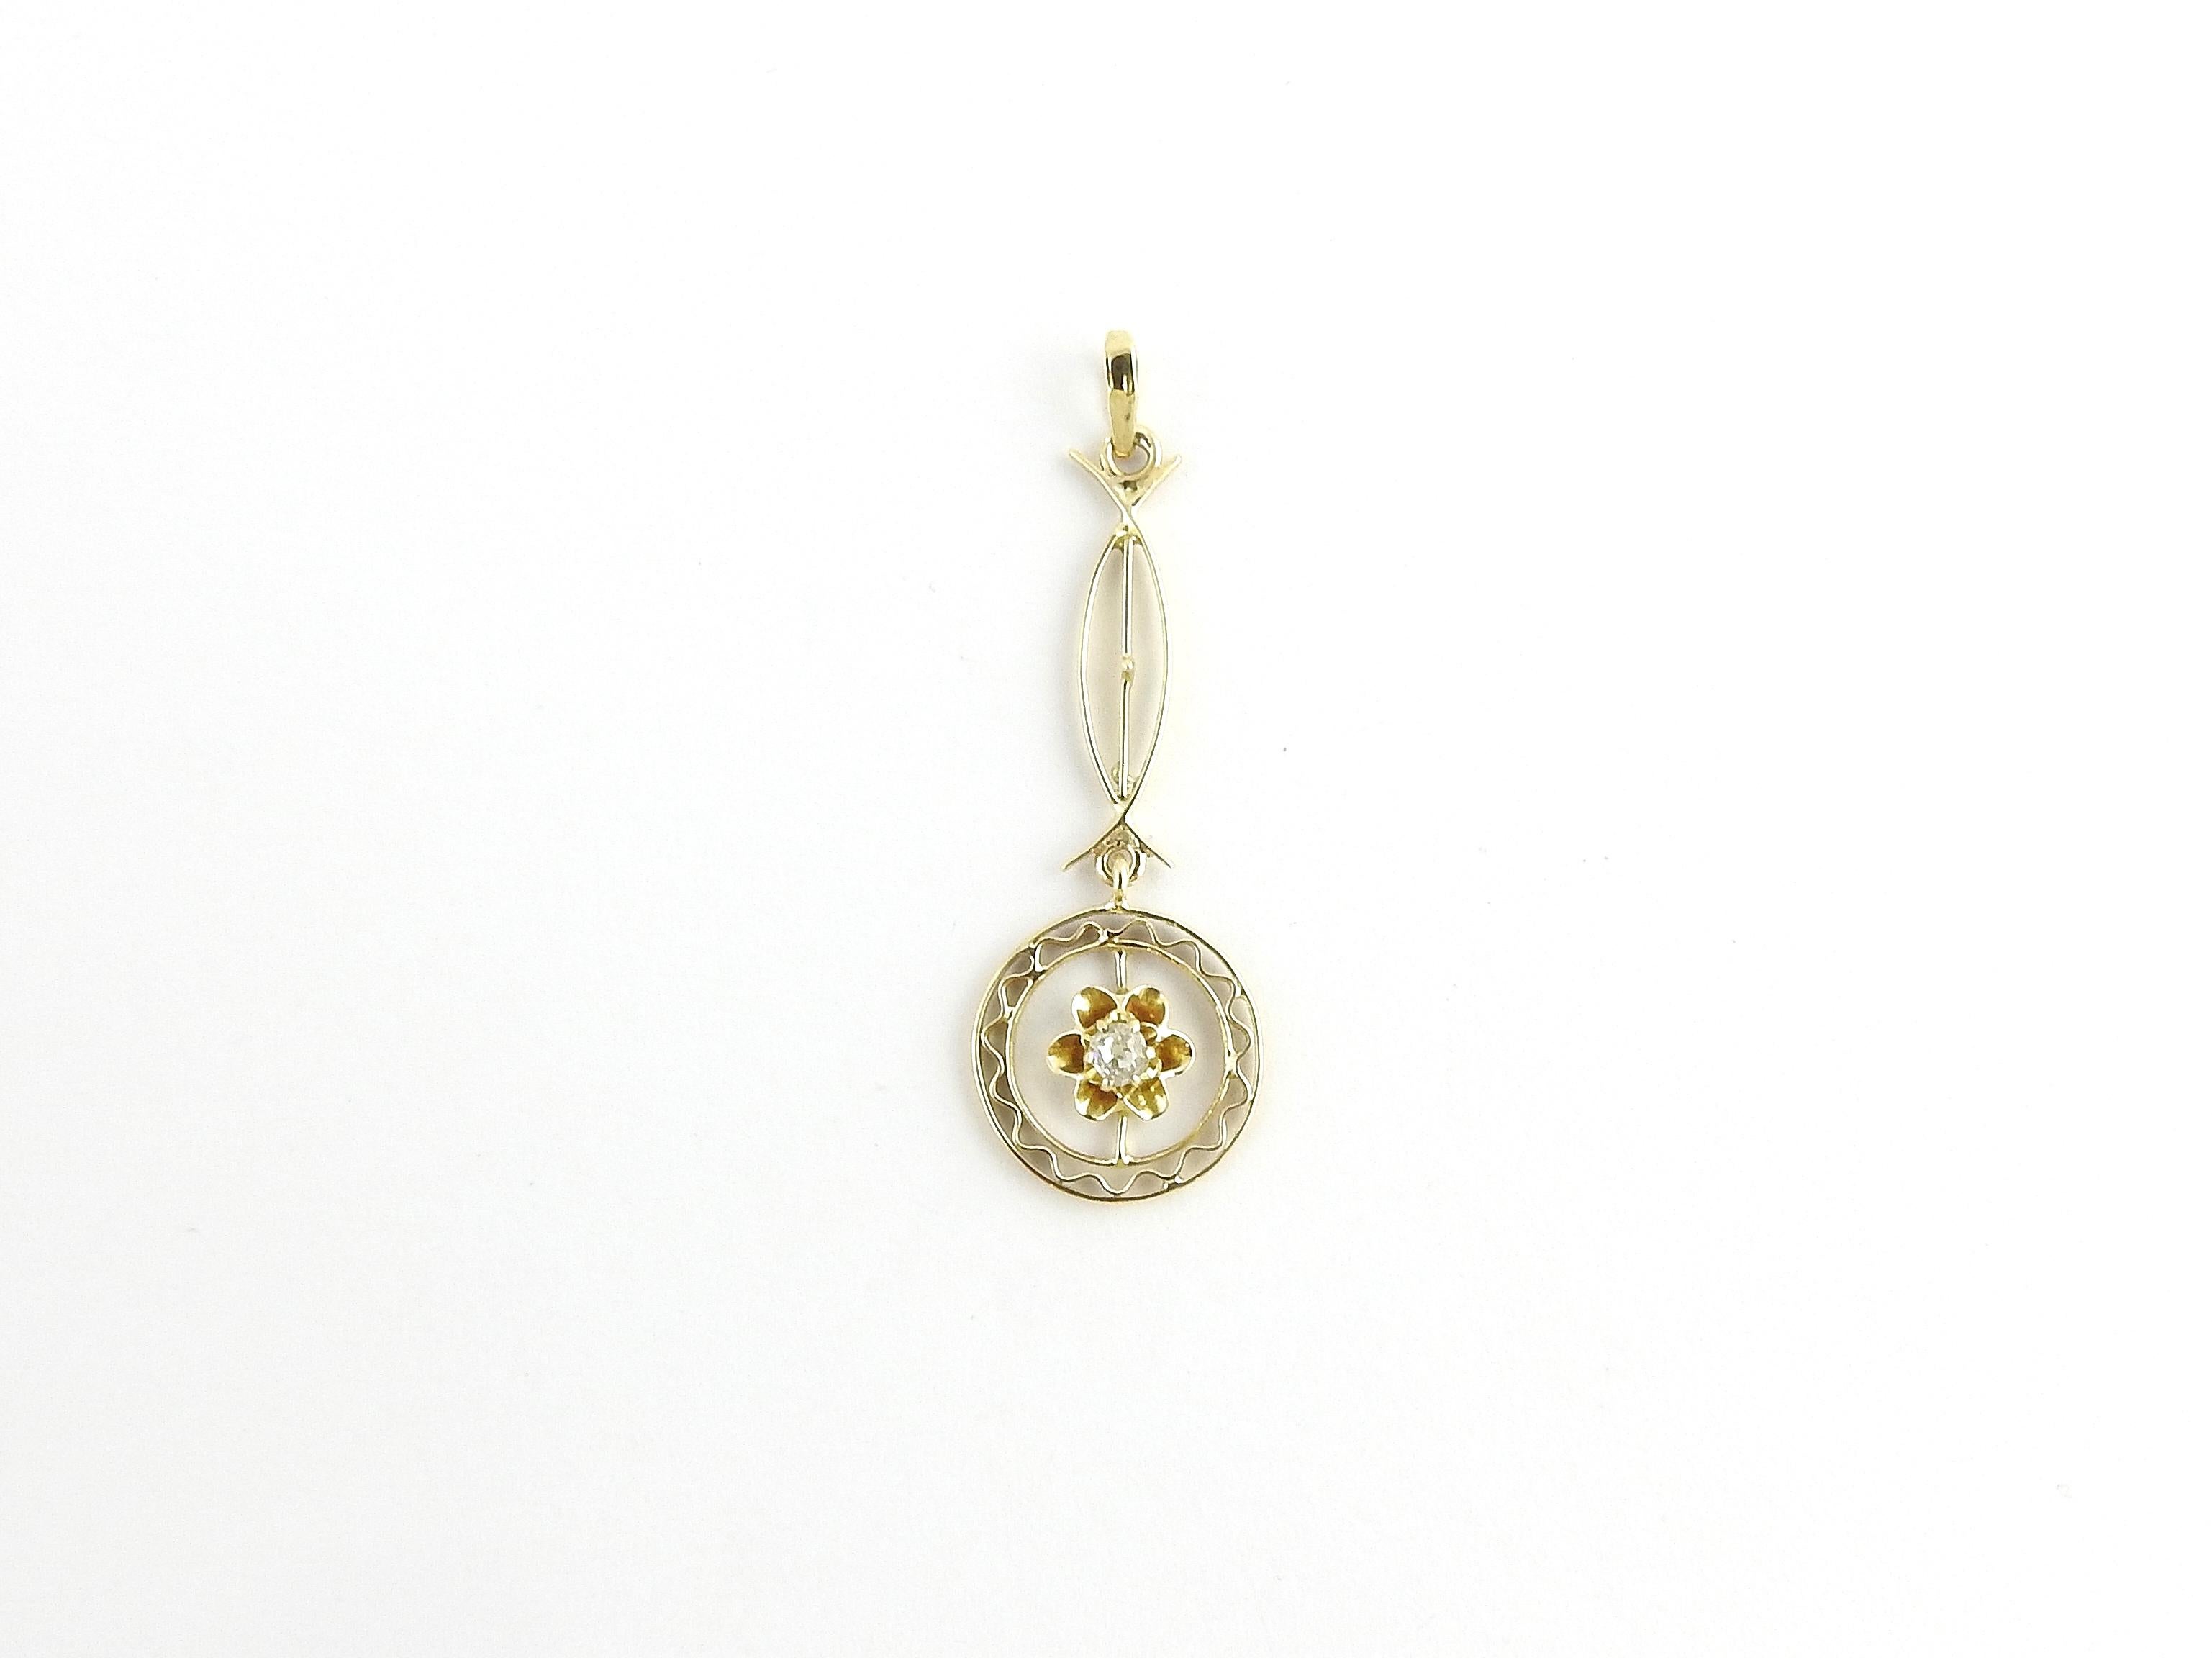 14 Karat Yellow Gold and Diamond Pendant-

This lovely pendant features one round old mine cut diamond set in beautifully detailed 14K yellow gold.

Approximate total diamond weight:  .04 ct.

Diamond color:  G

Diamond clarity:  SI2

Size: 31 mm x